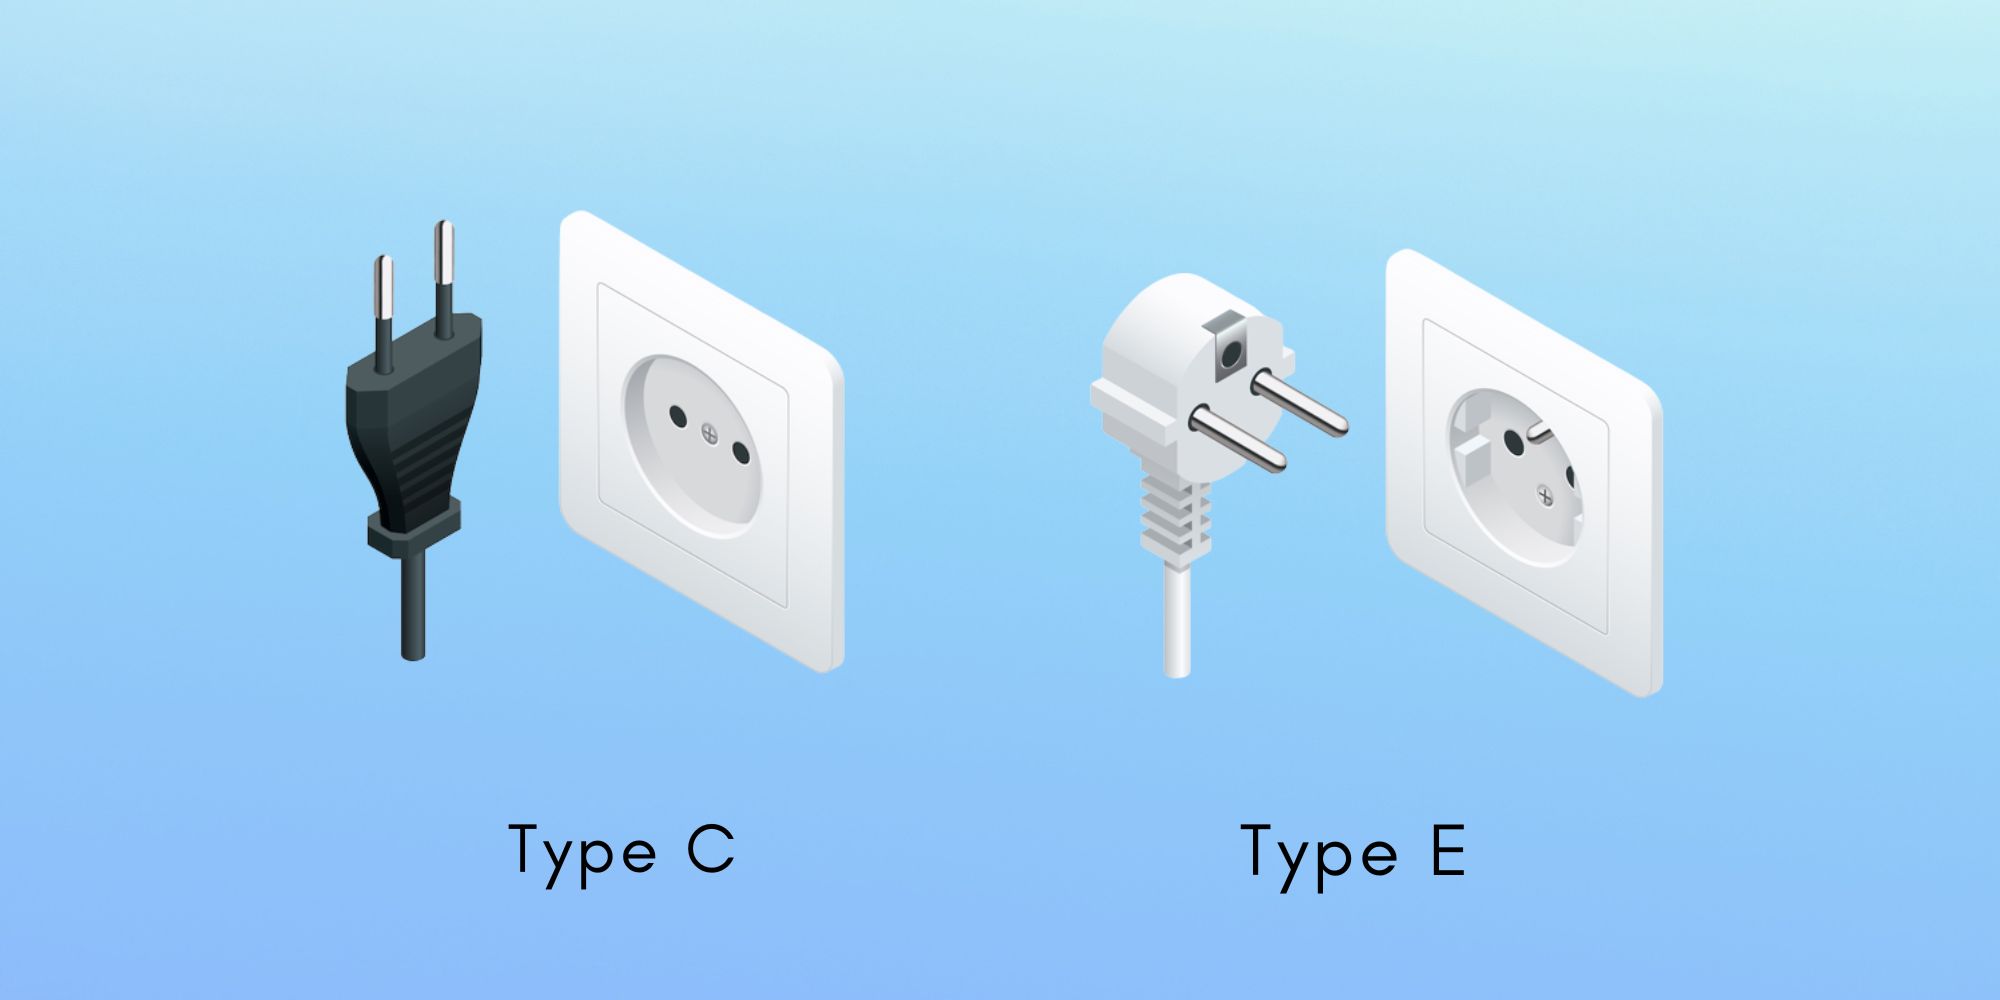 Slovakia Power Plugs and Sockets: Type C and Type E
